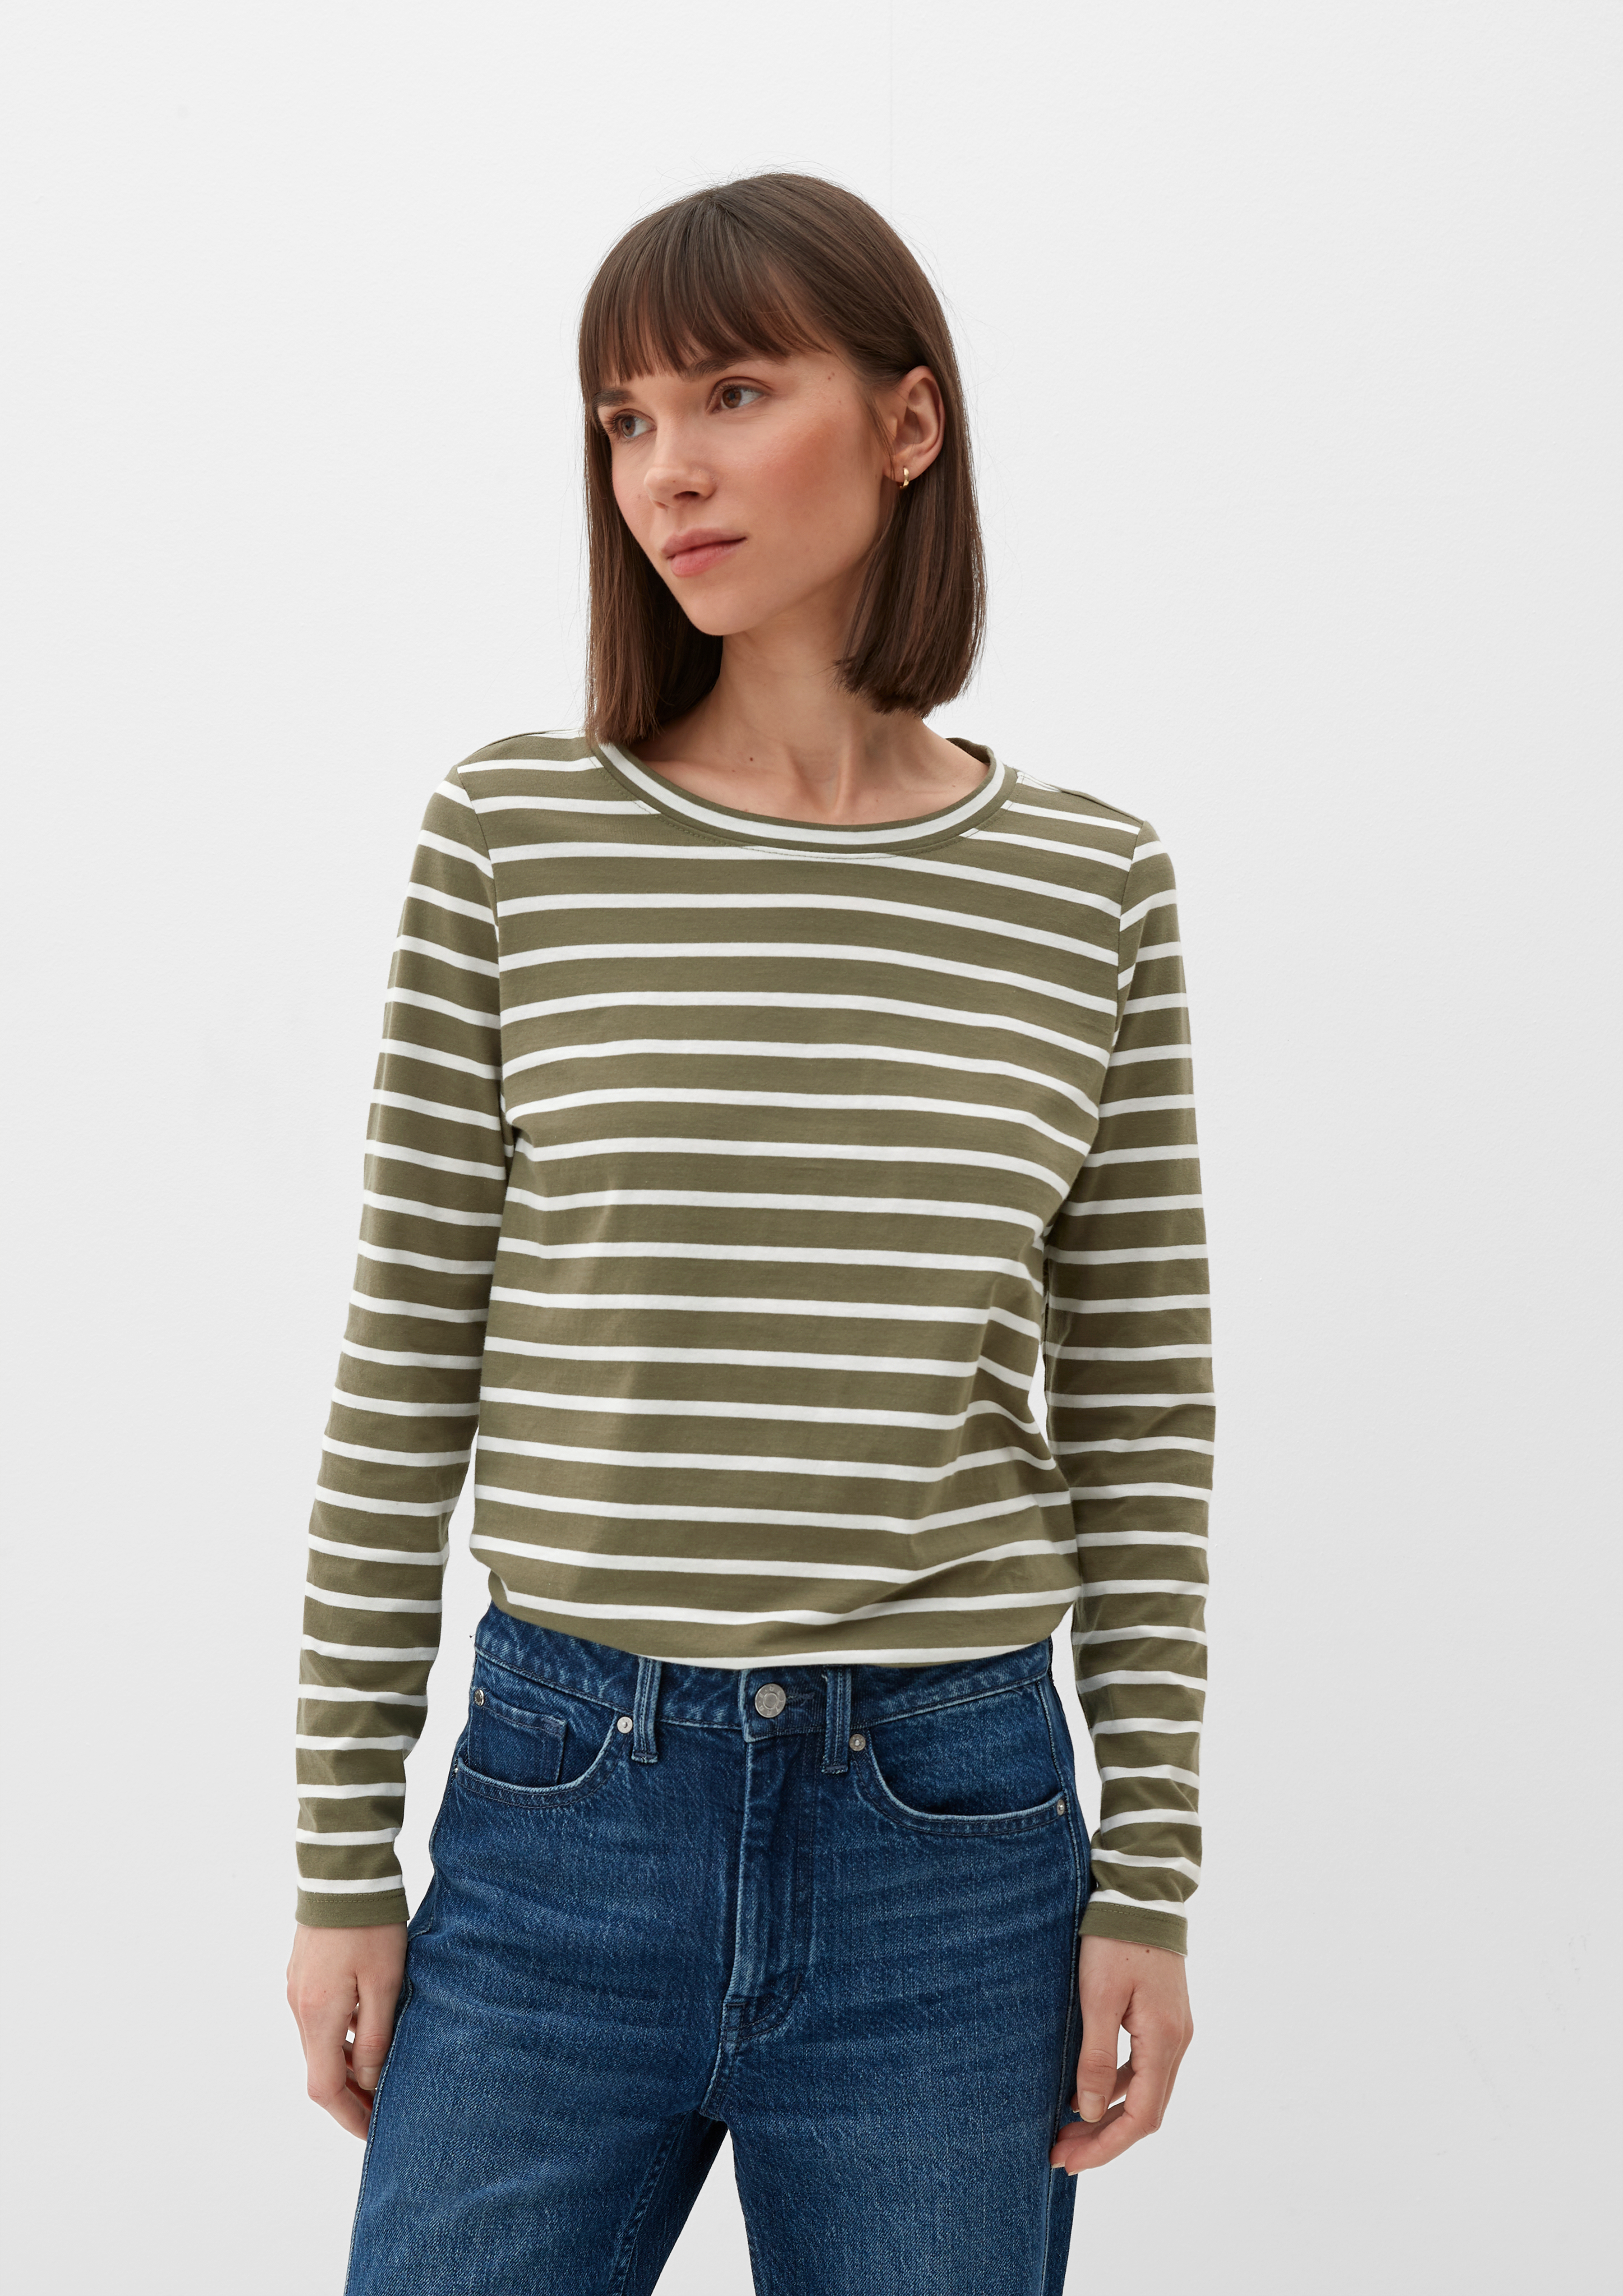 Striped sleeve - top long jersey navy